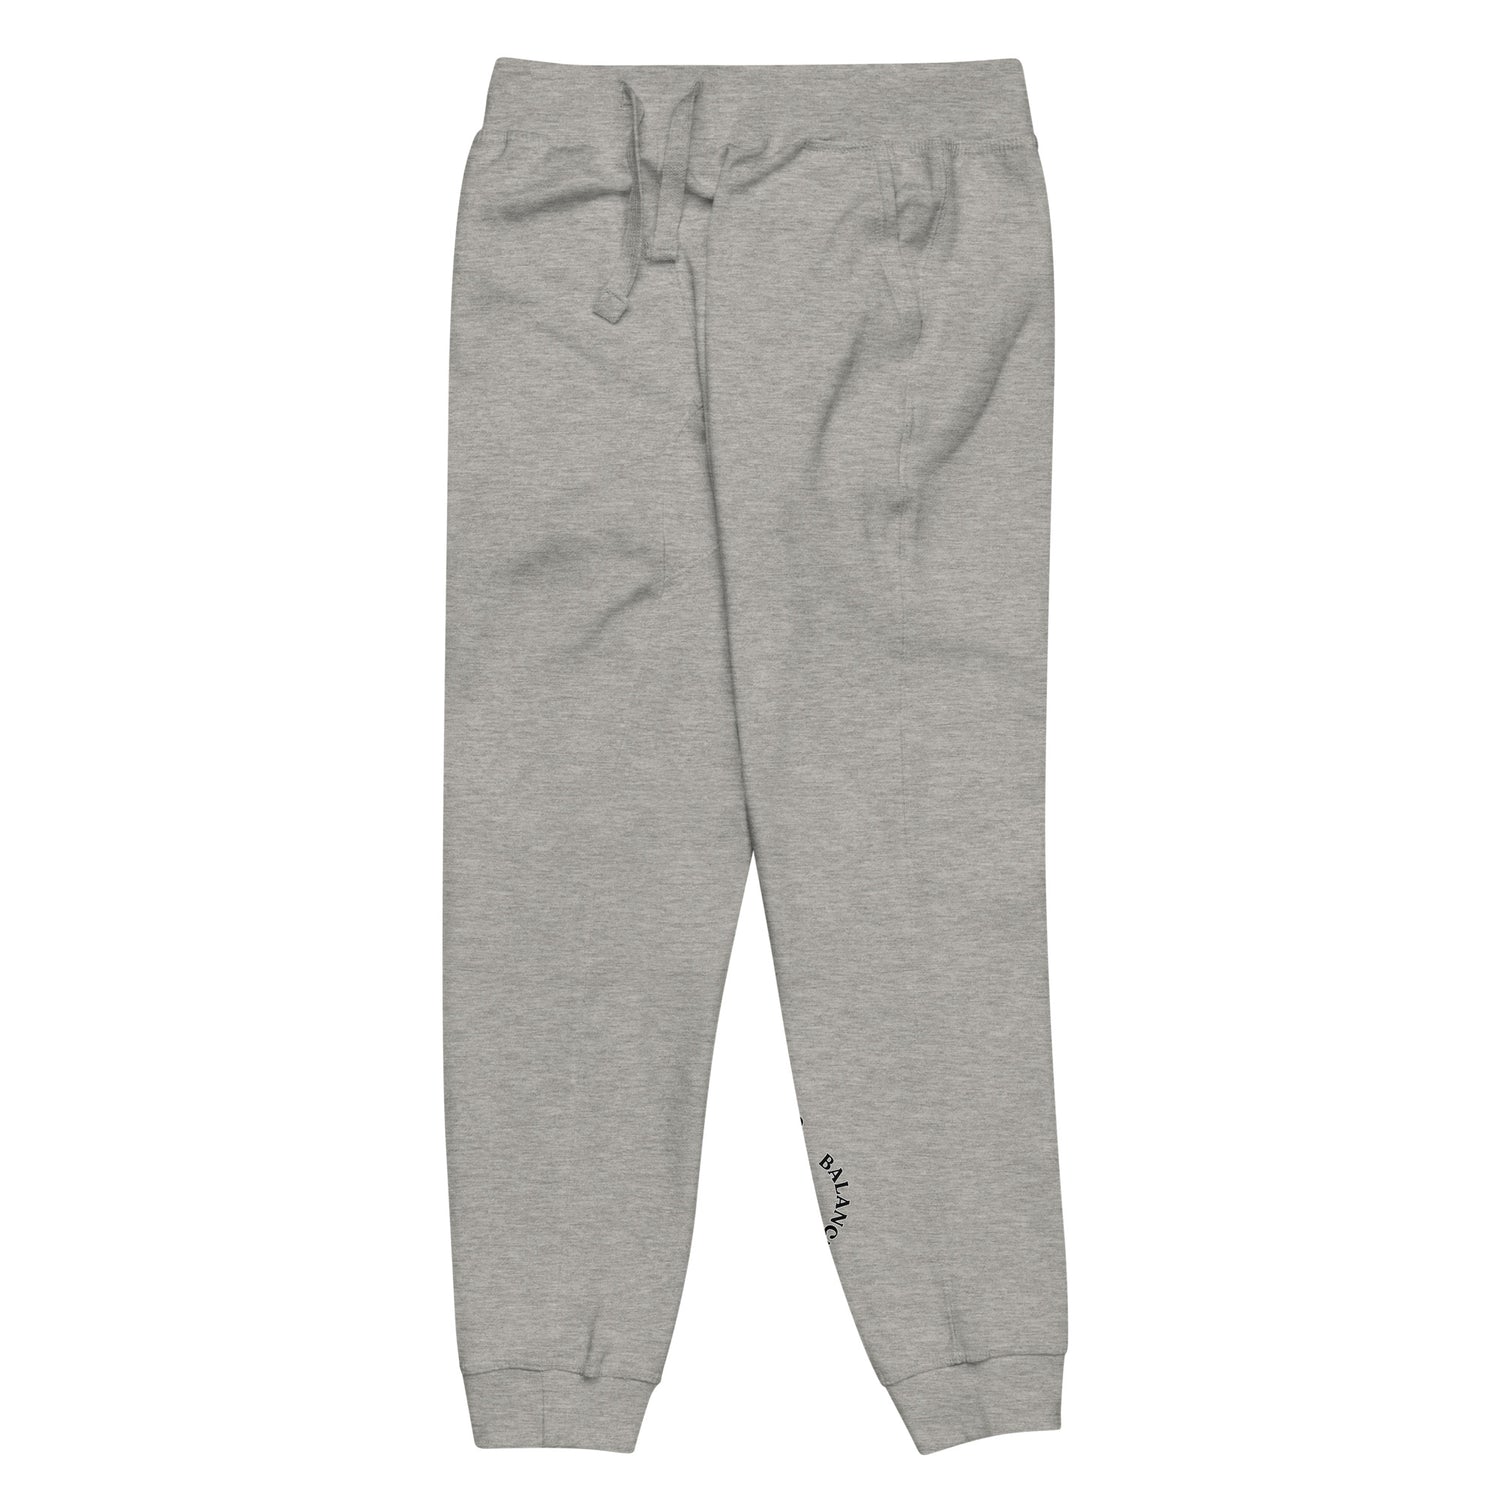 Side of full length Grey sweat pant with pockets on side, featuring "Choose Balance" printed on left side lower leg.